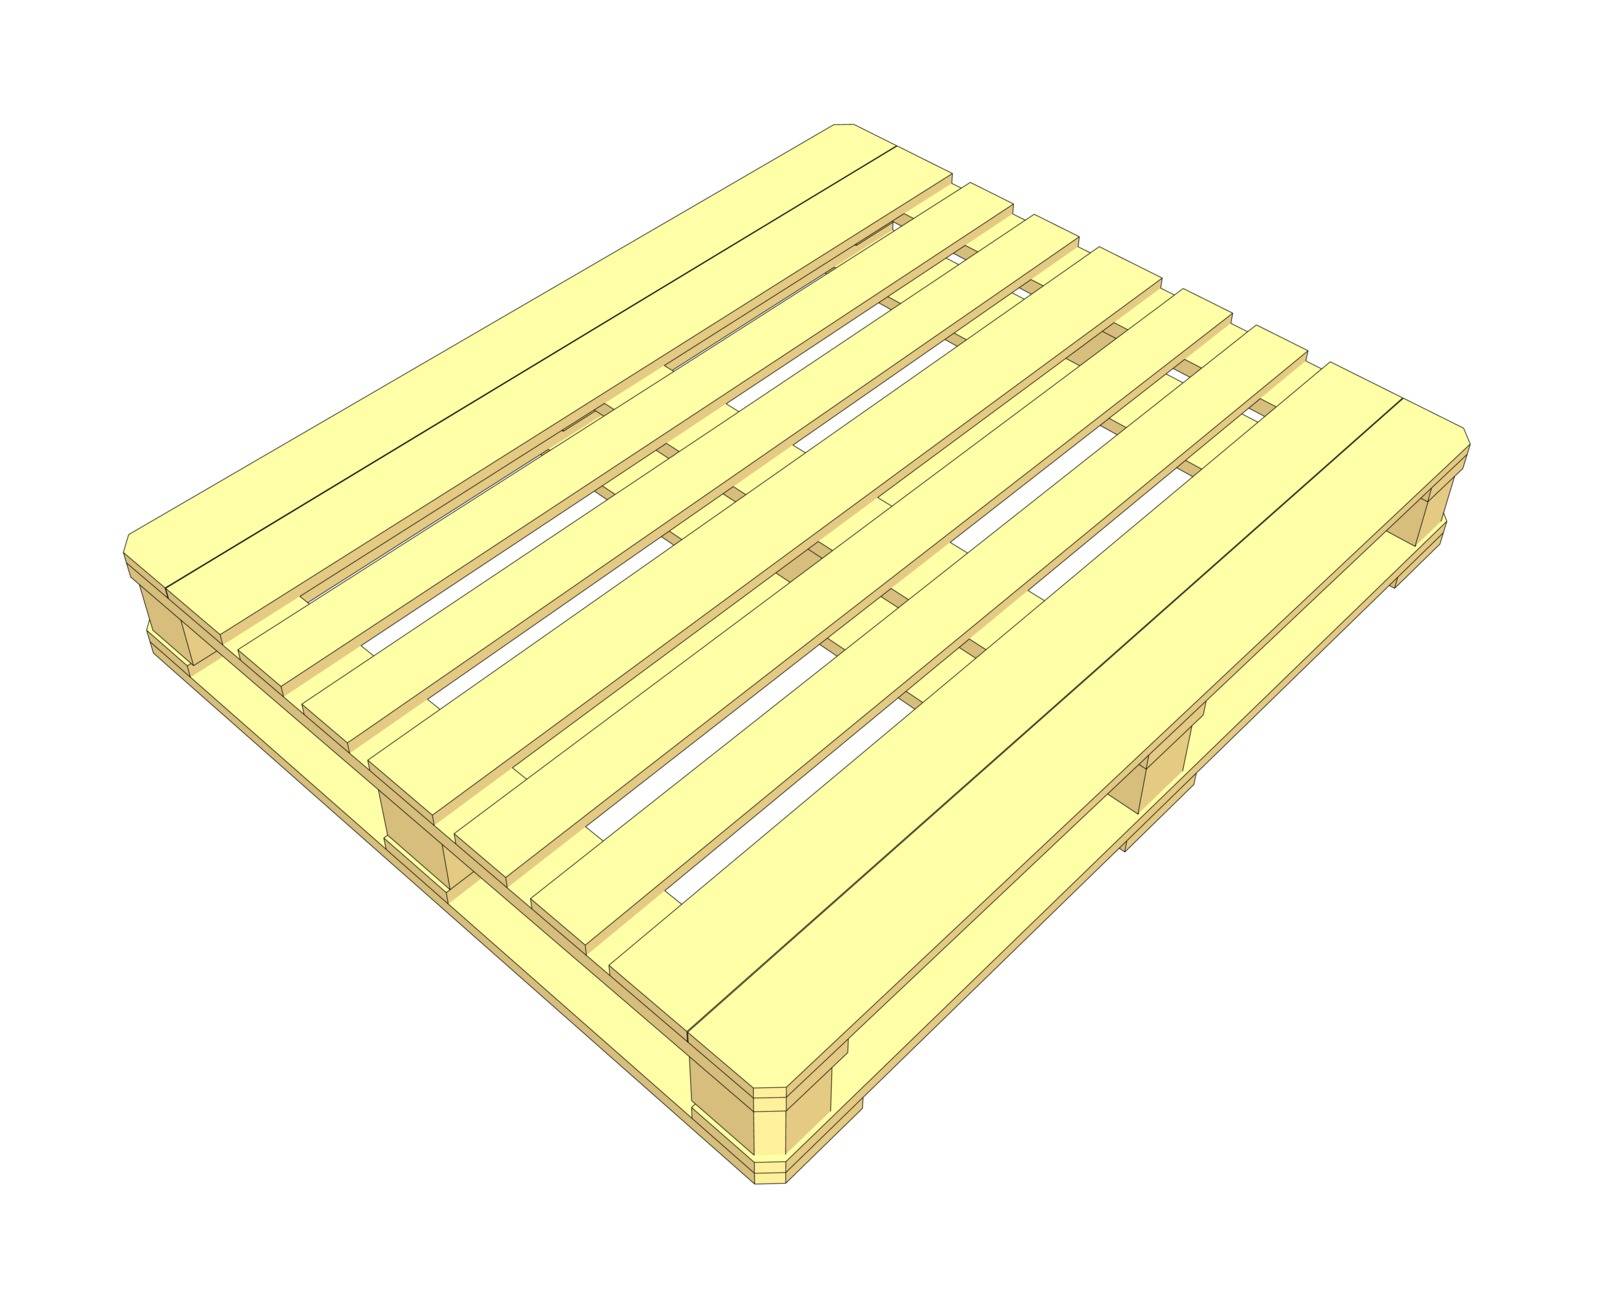 Wooden pallet on white background. EPS 10 vector format. Vector rendering of 3d